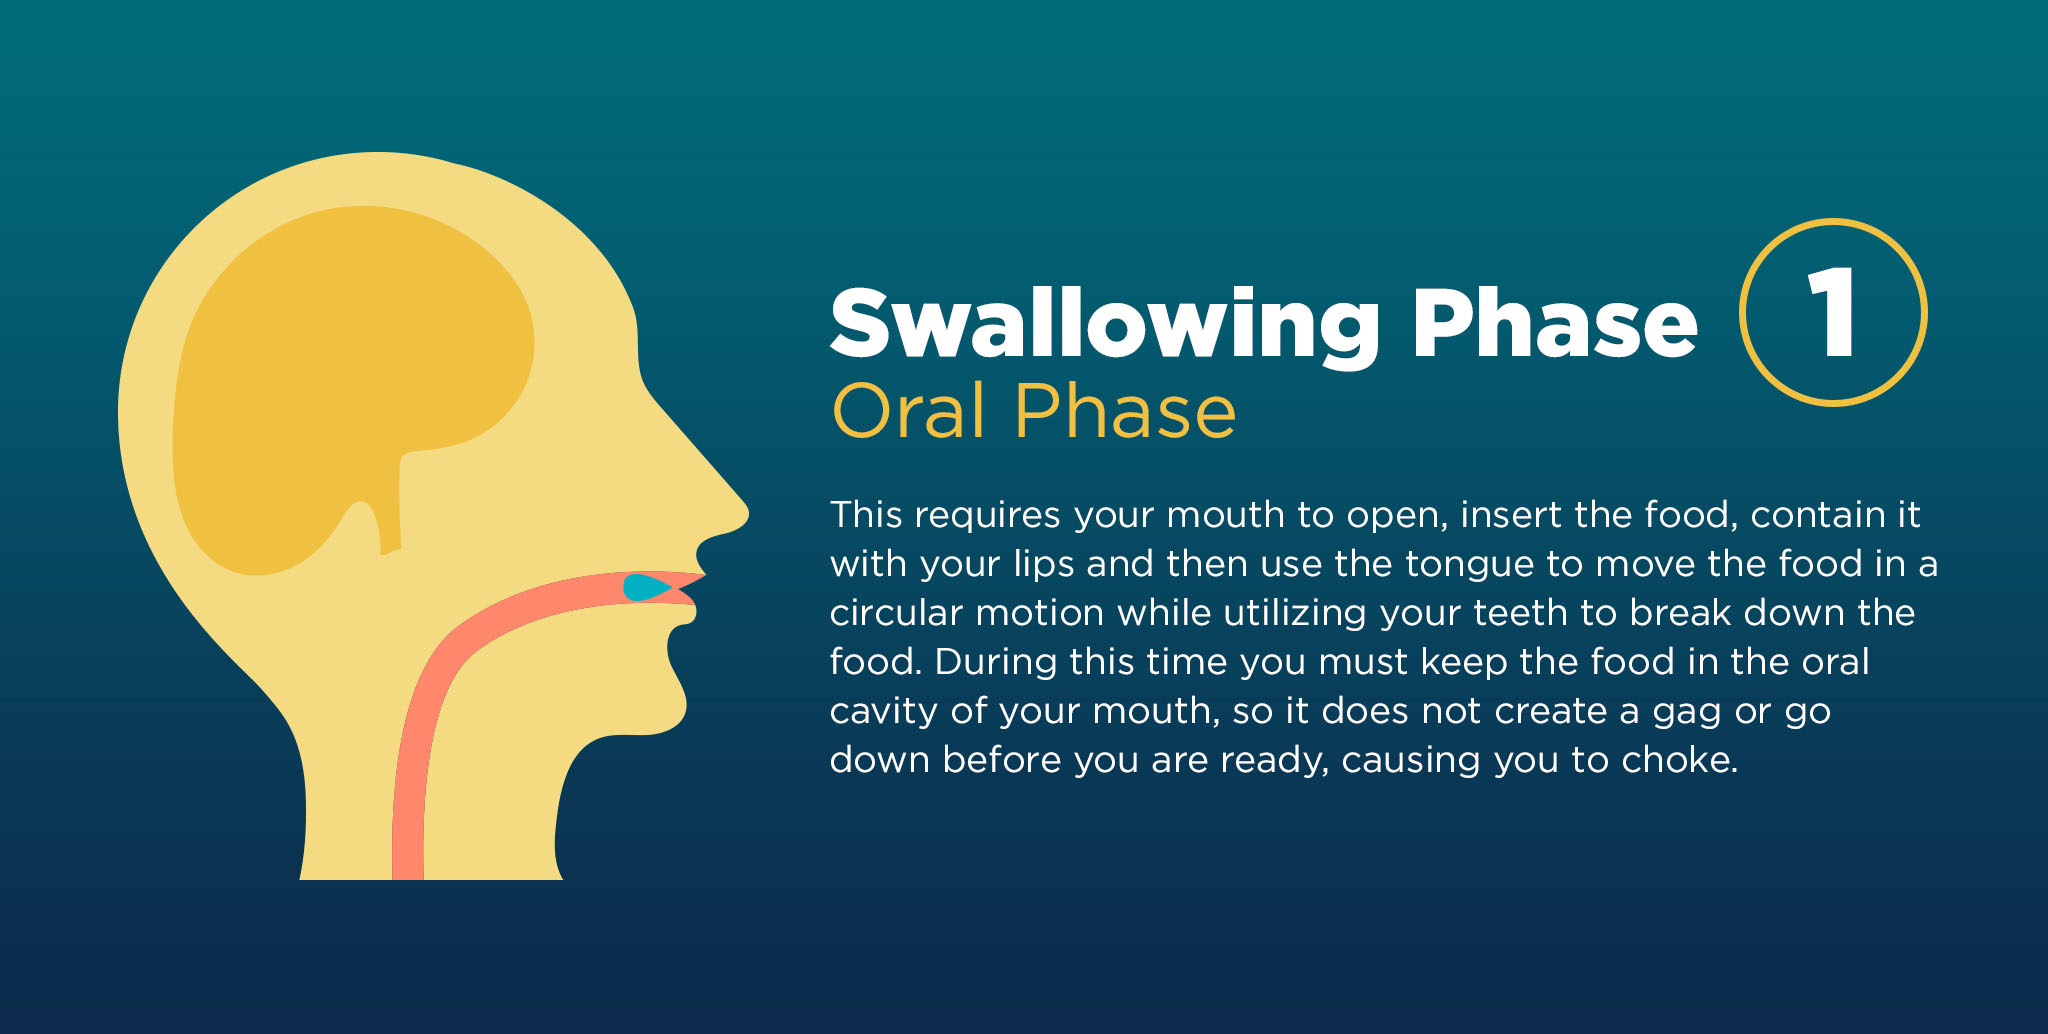 explanation of the first phase of swallowing. Deficits in the swallowing phases is how dysphagia is diagnosed.